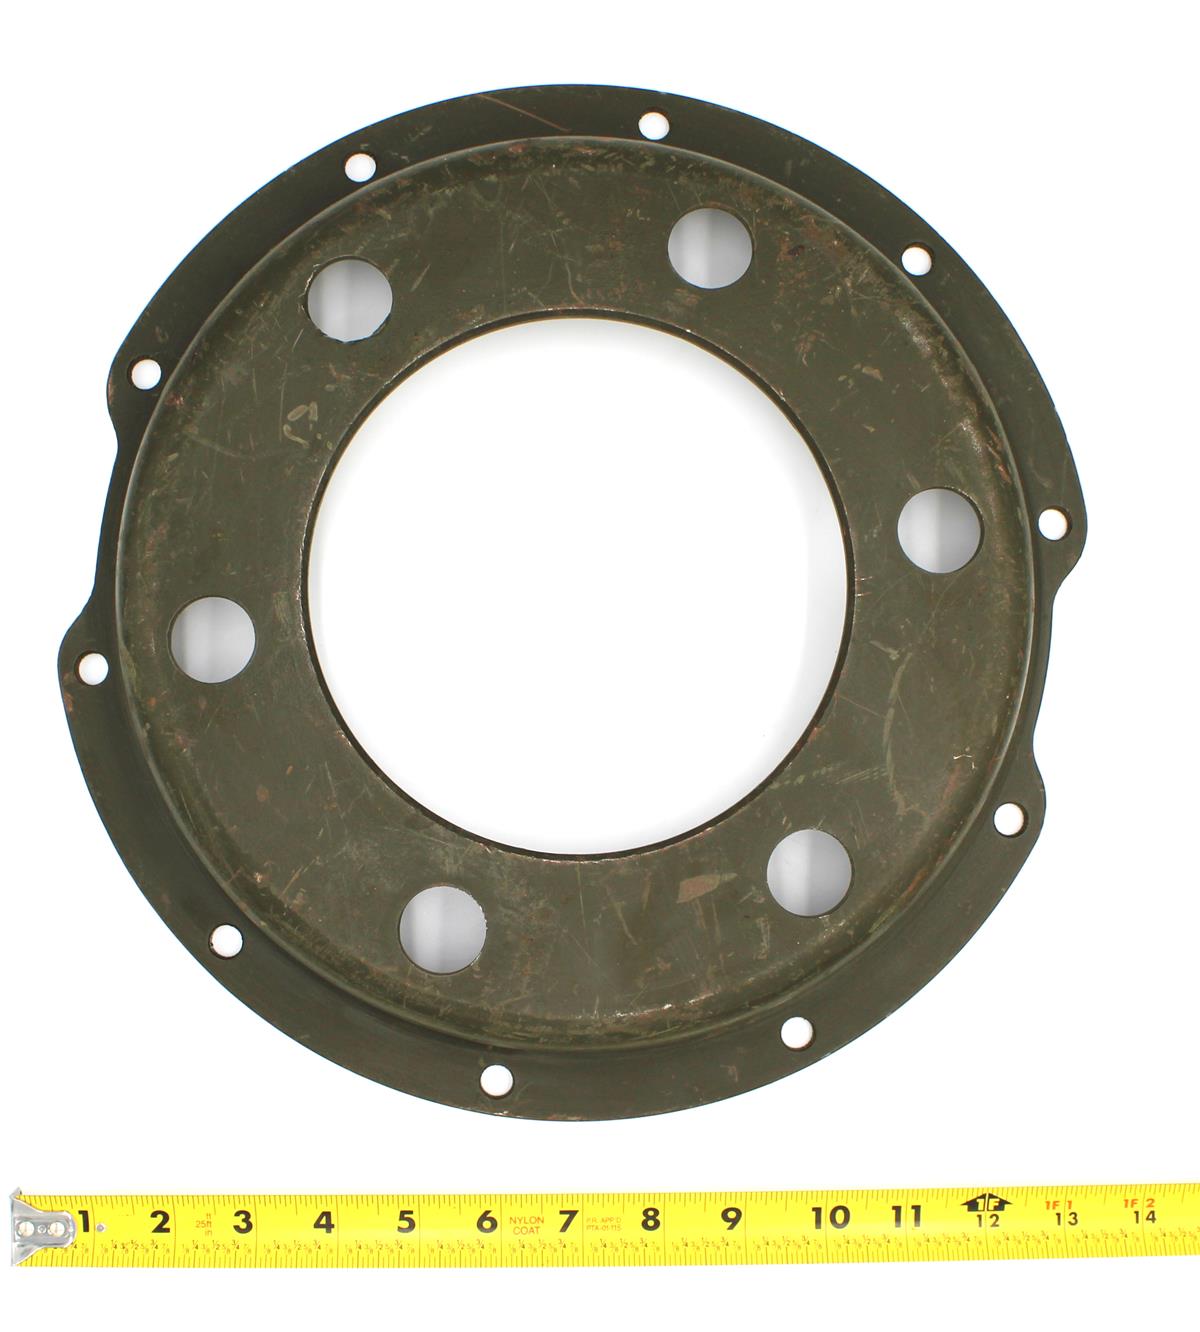 M35-843 | M35-843 Front Brake Drum Adapter Rockwell Steering Axle M35A2 (2).JPG